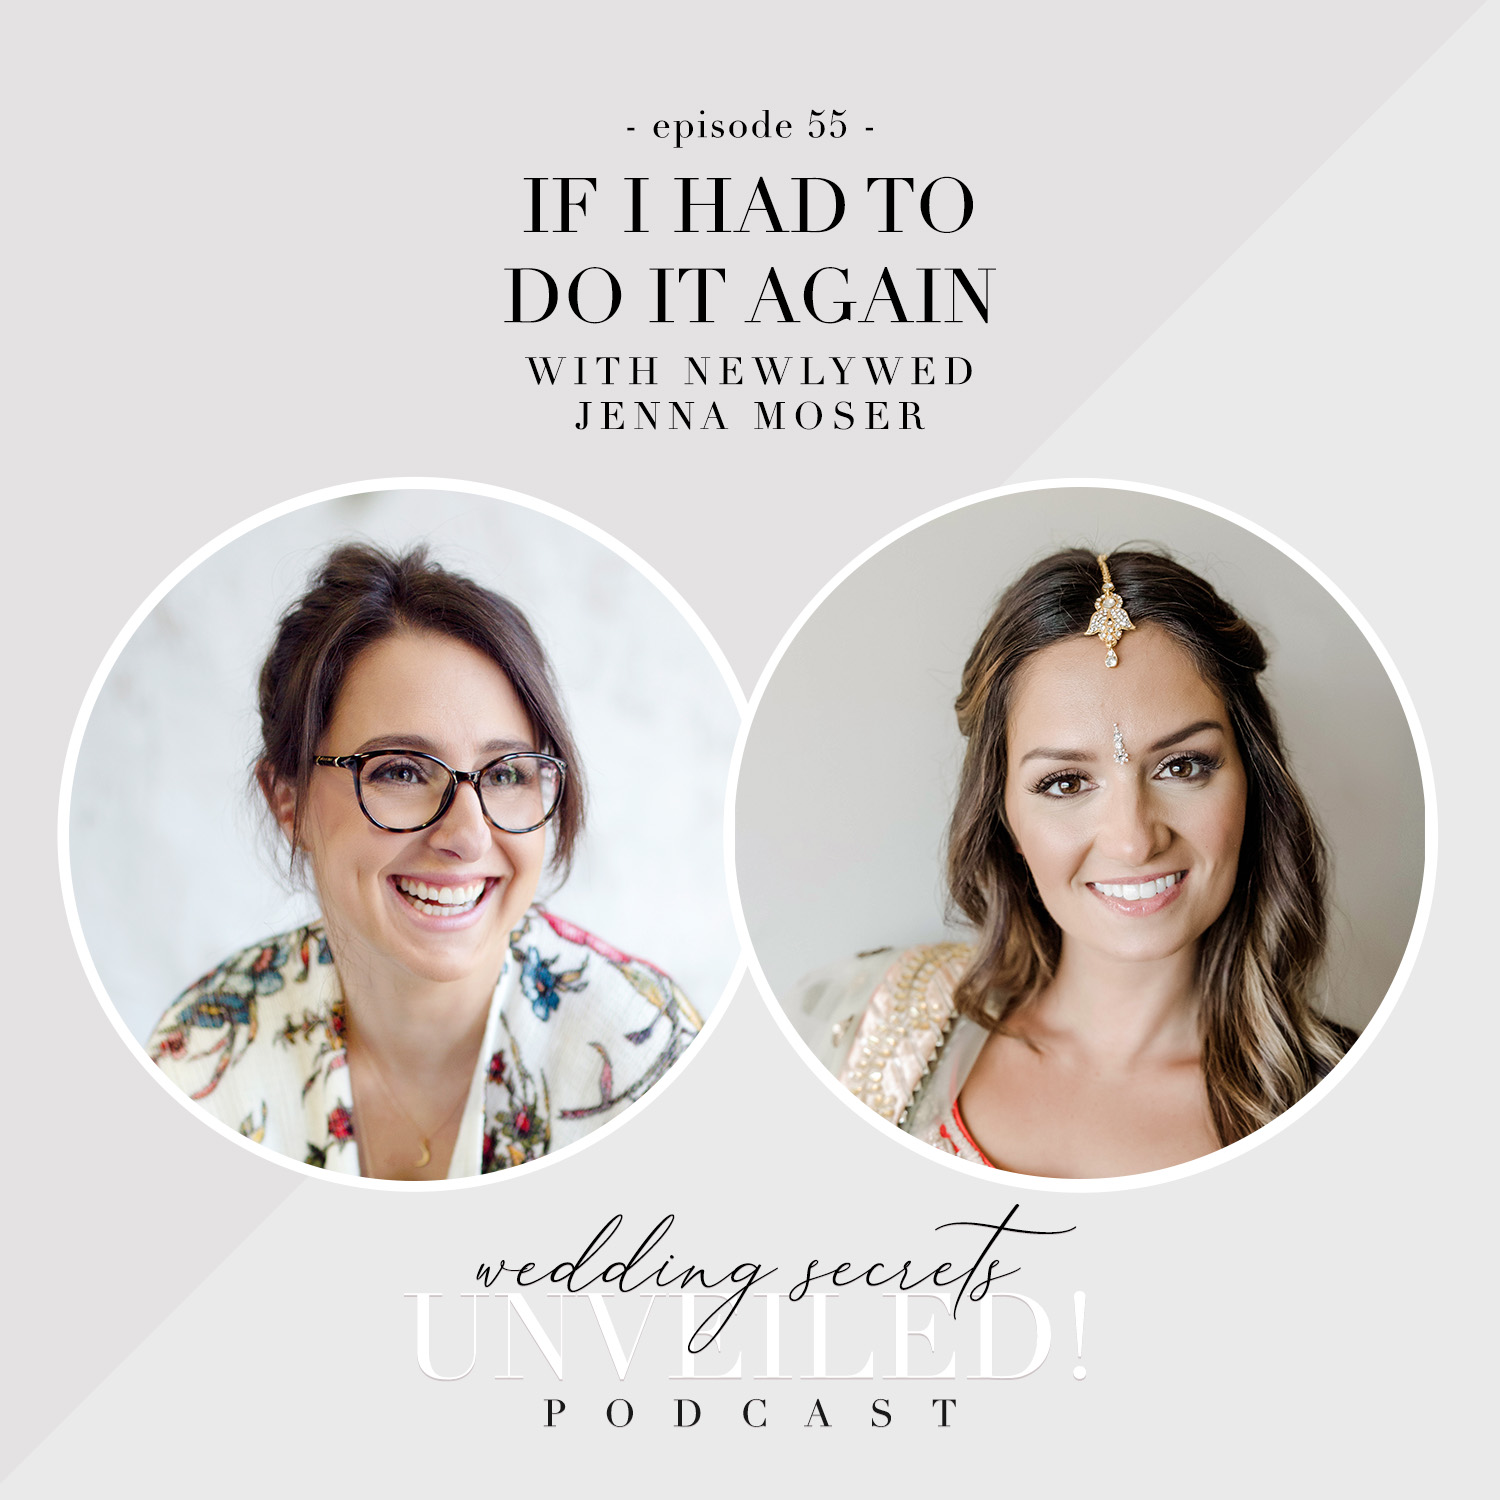 If I Had to Do It Again: Newlywed Jenna Moser shares about her wedding planning - what she'd do again or change for future newlyweds